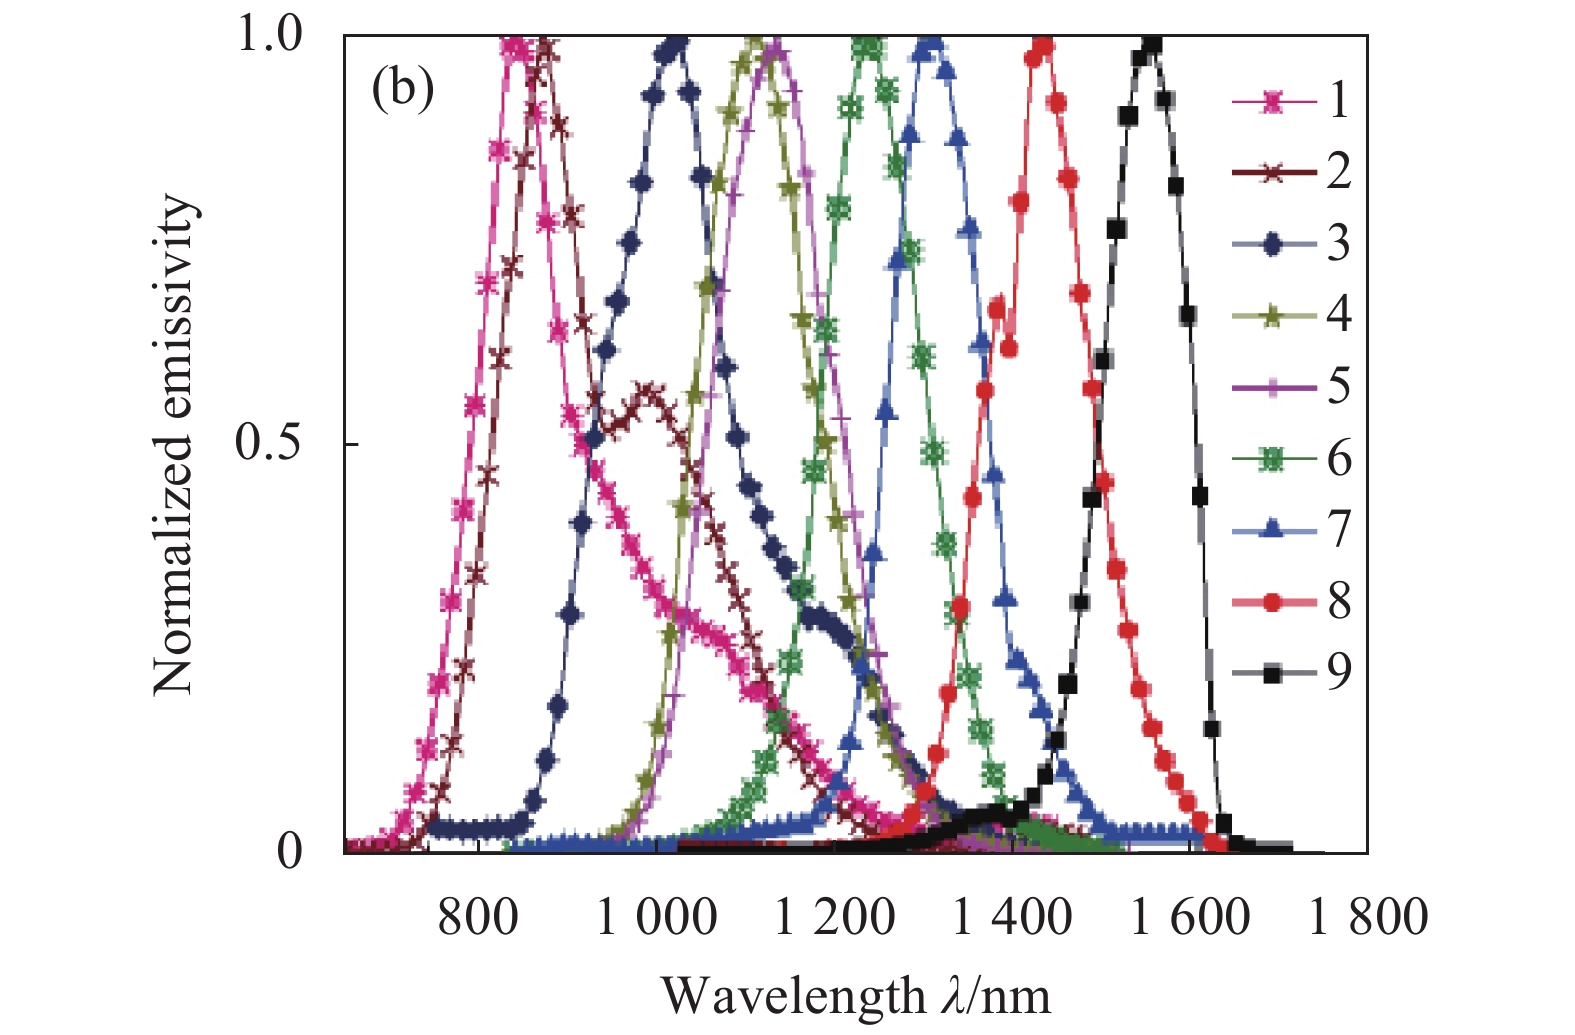 Absorption (a) and emission (b) spectra of PbS quantum dots in different sizes